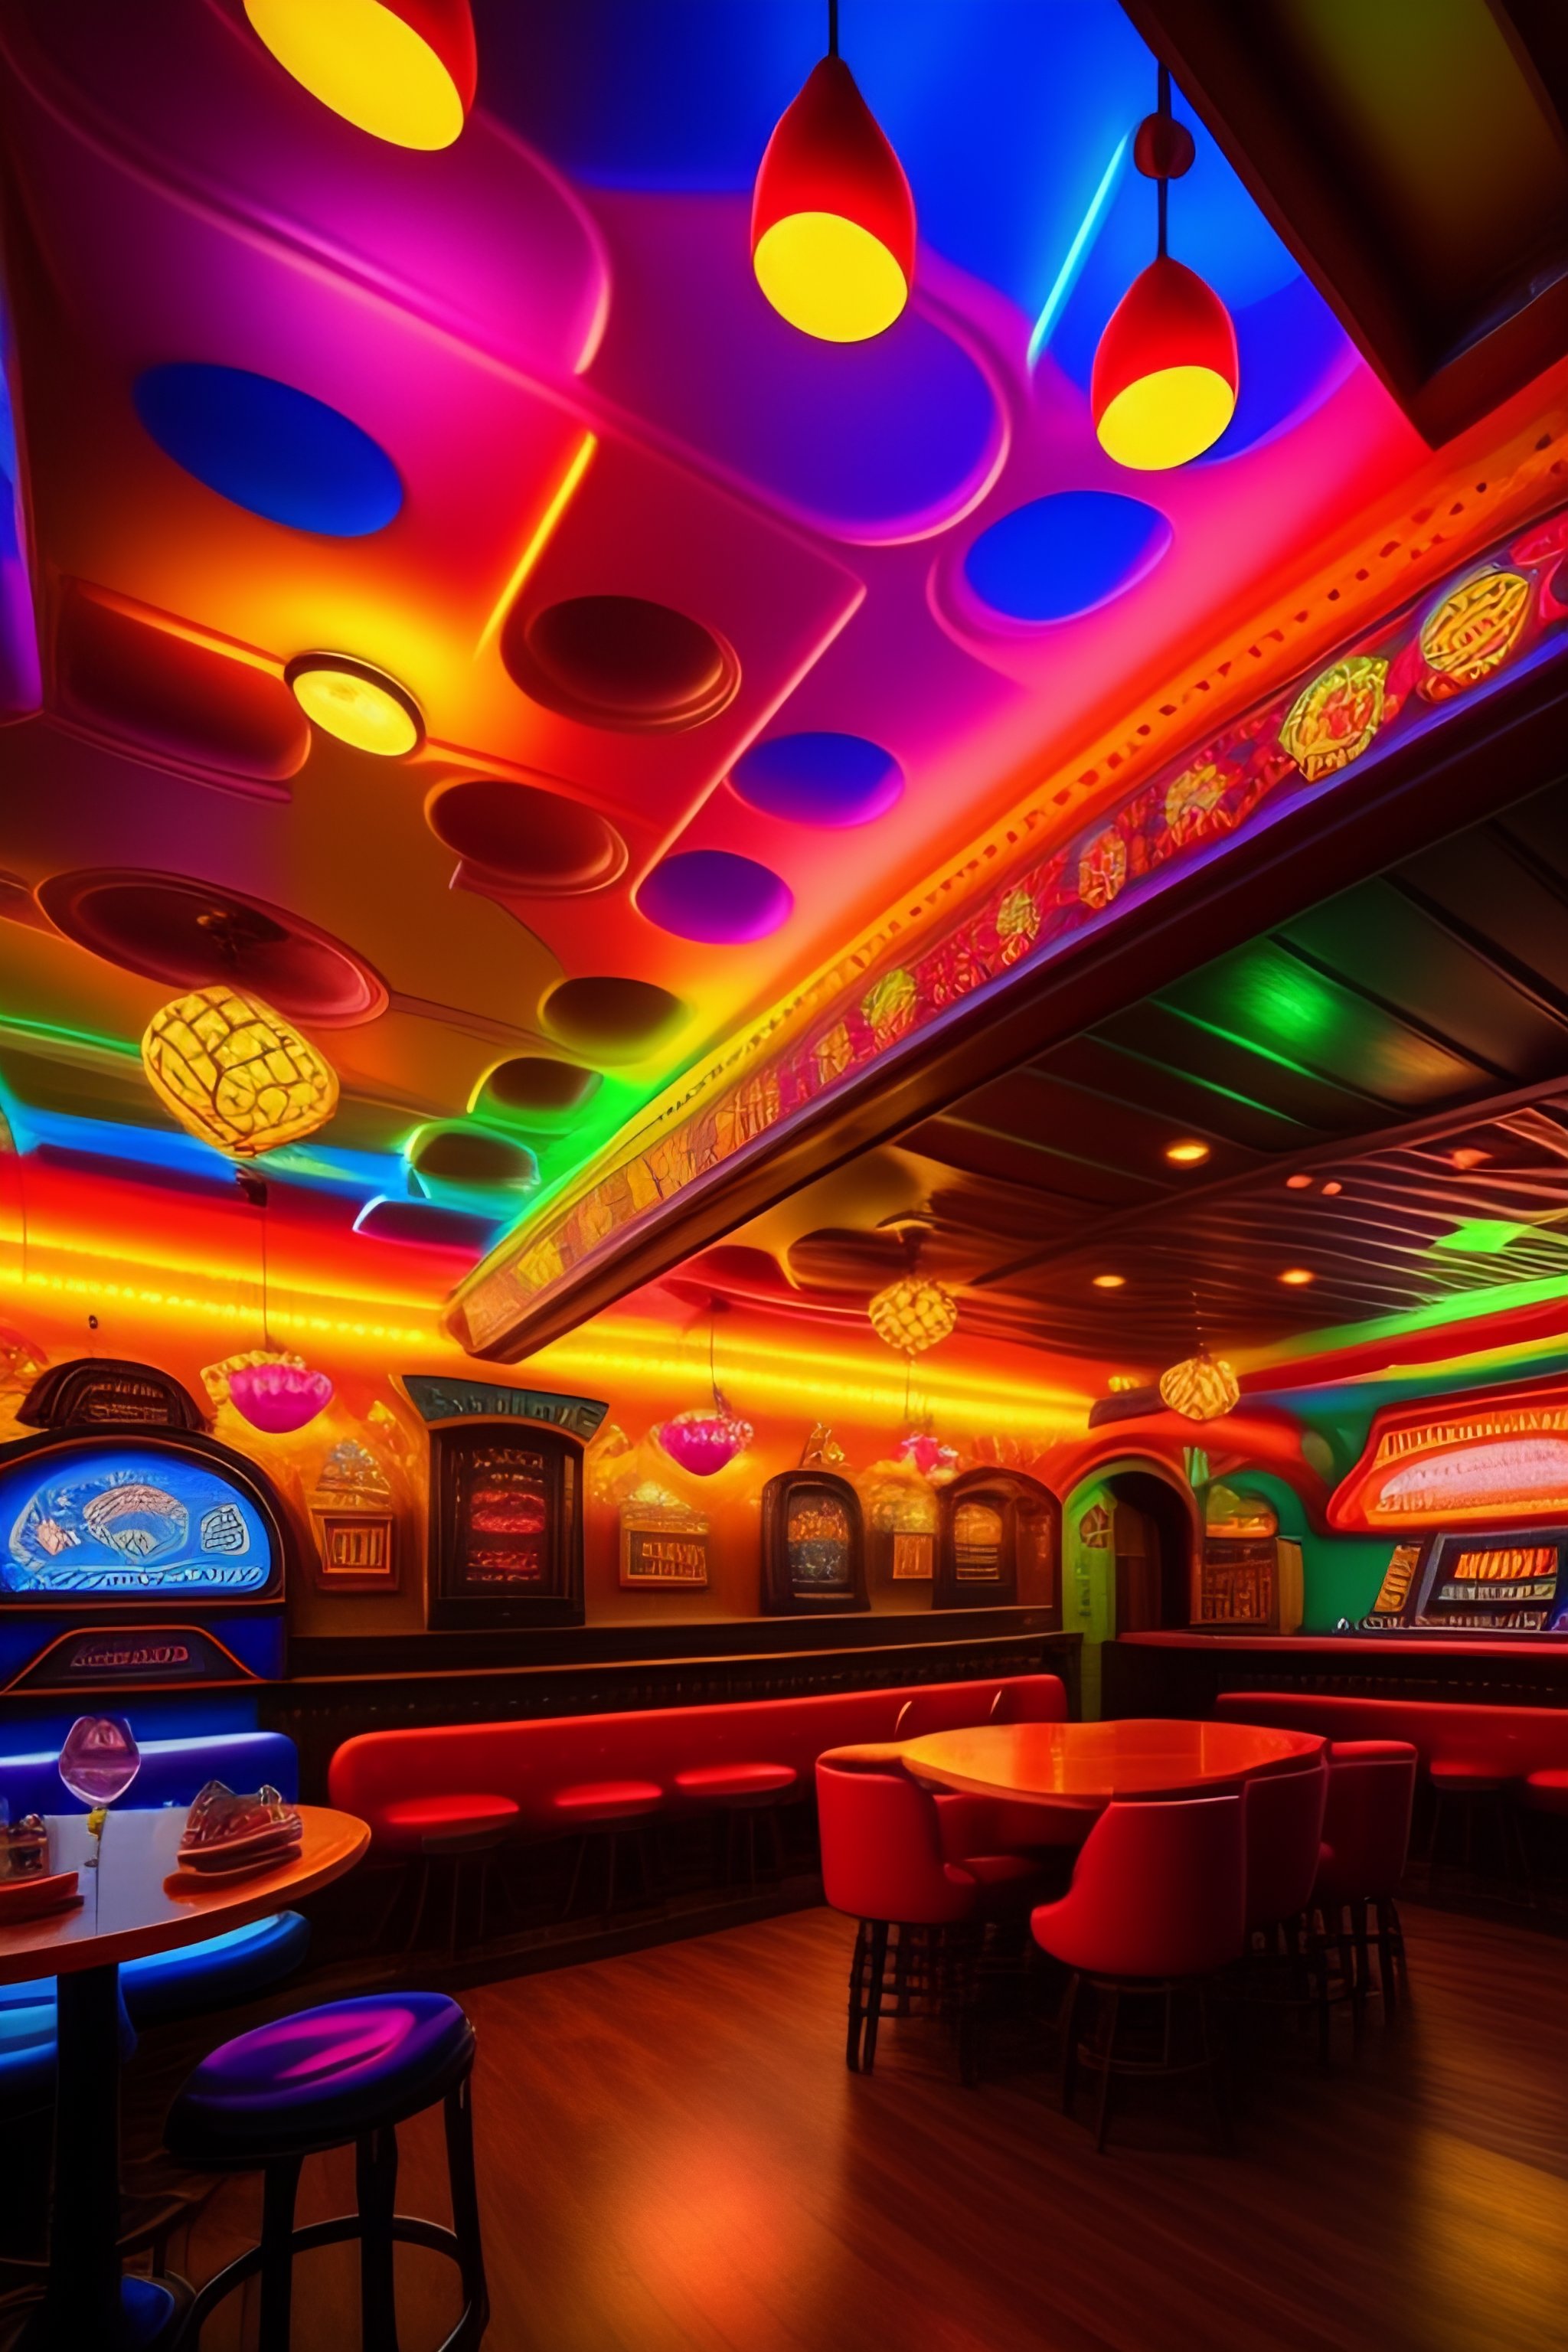 Lexica - A colorful and vibrant Tavern with a magical arcade theme. The